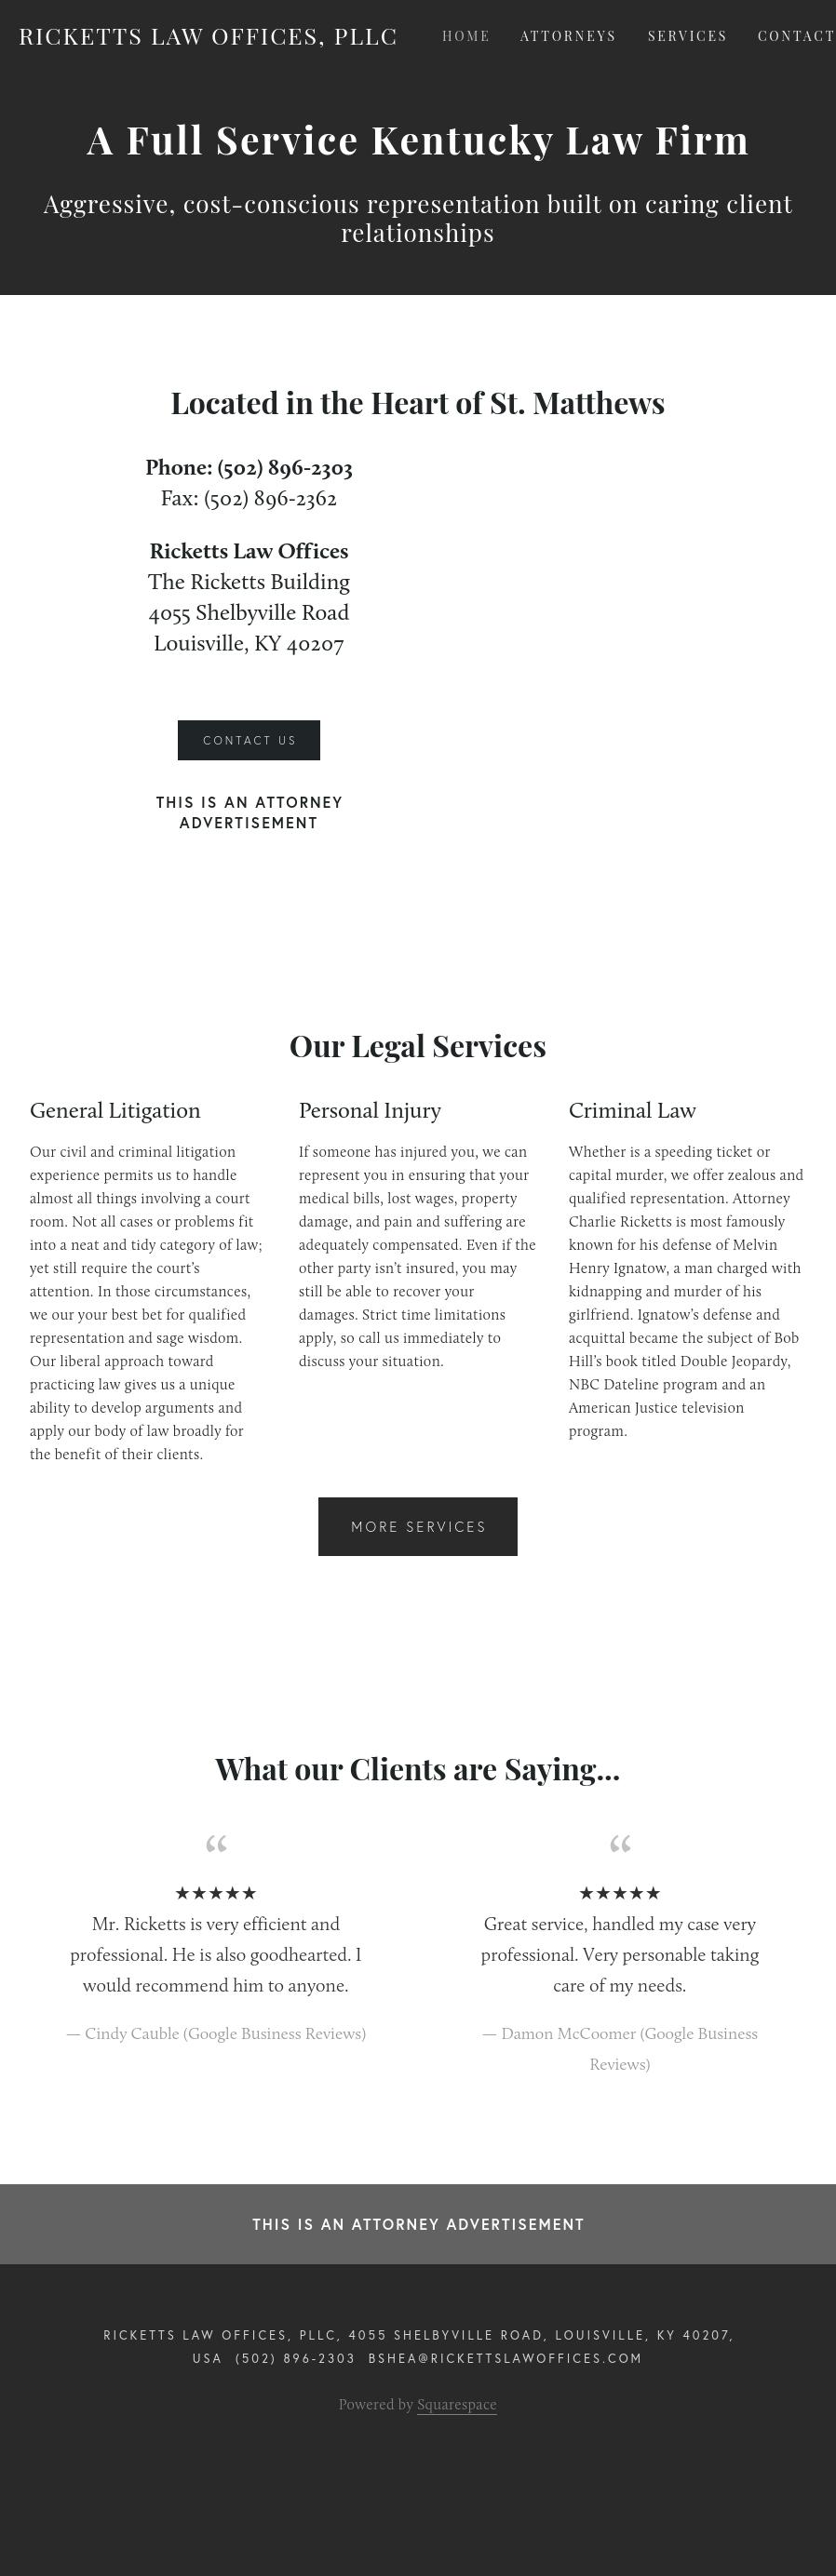 Ricketts Law Offices of PLLC - Louisville KY Lawyers